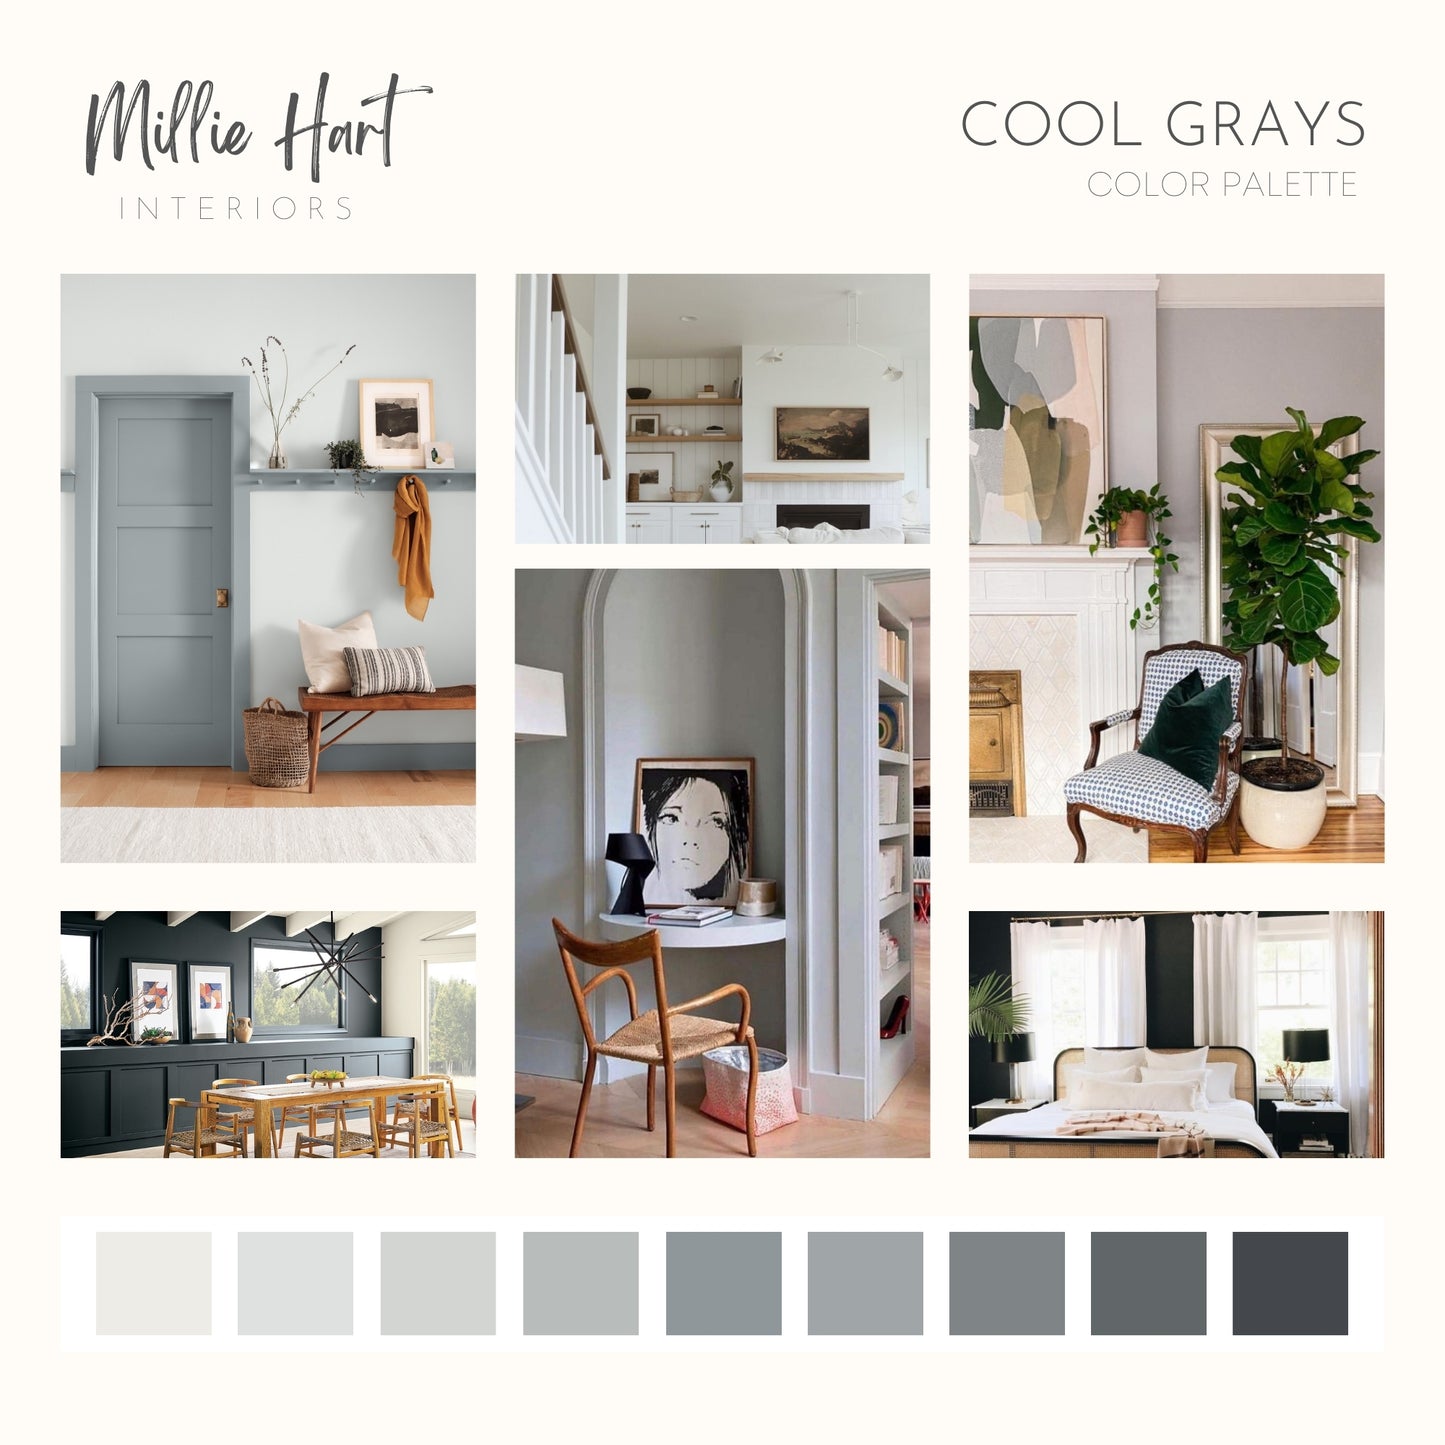 Cool Grays Benjamin Moore Paint Palette, Interior Paint Colors for Home, Cool Grays, Coastal Colors, Modern Neutrals, White Heron